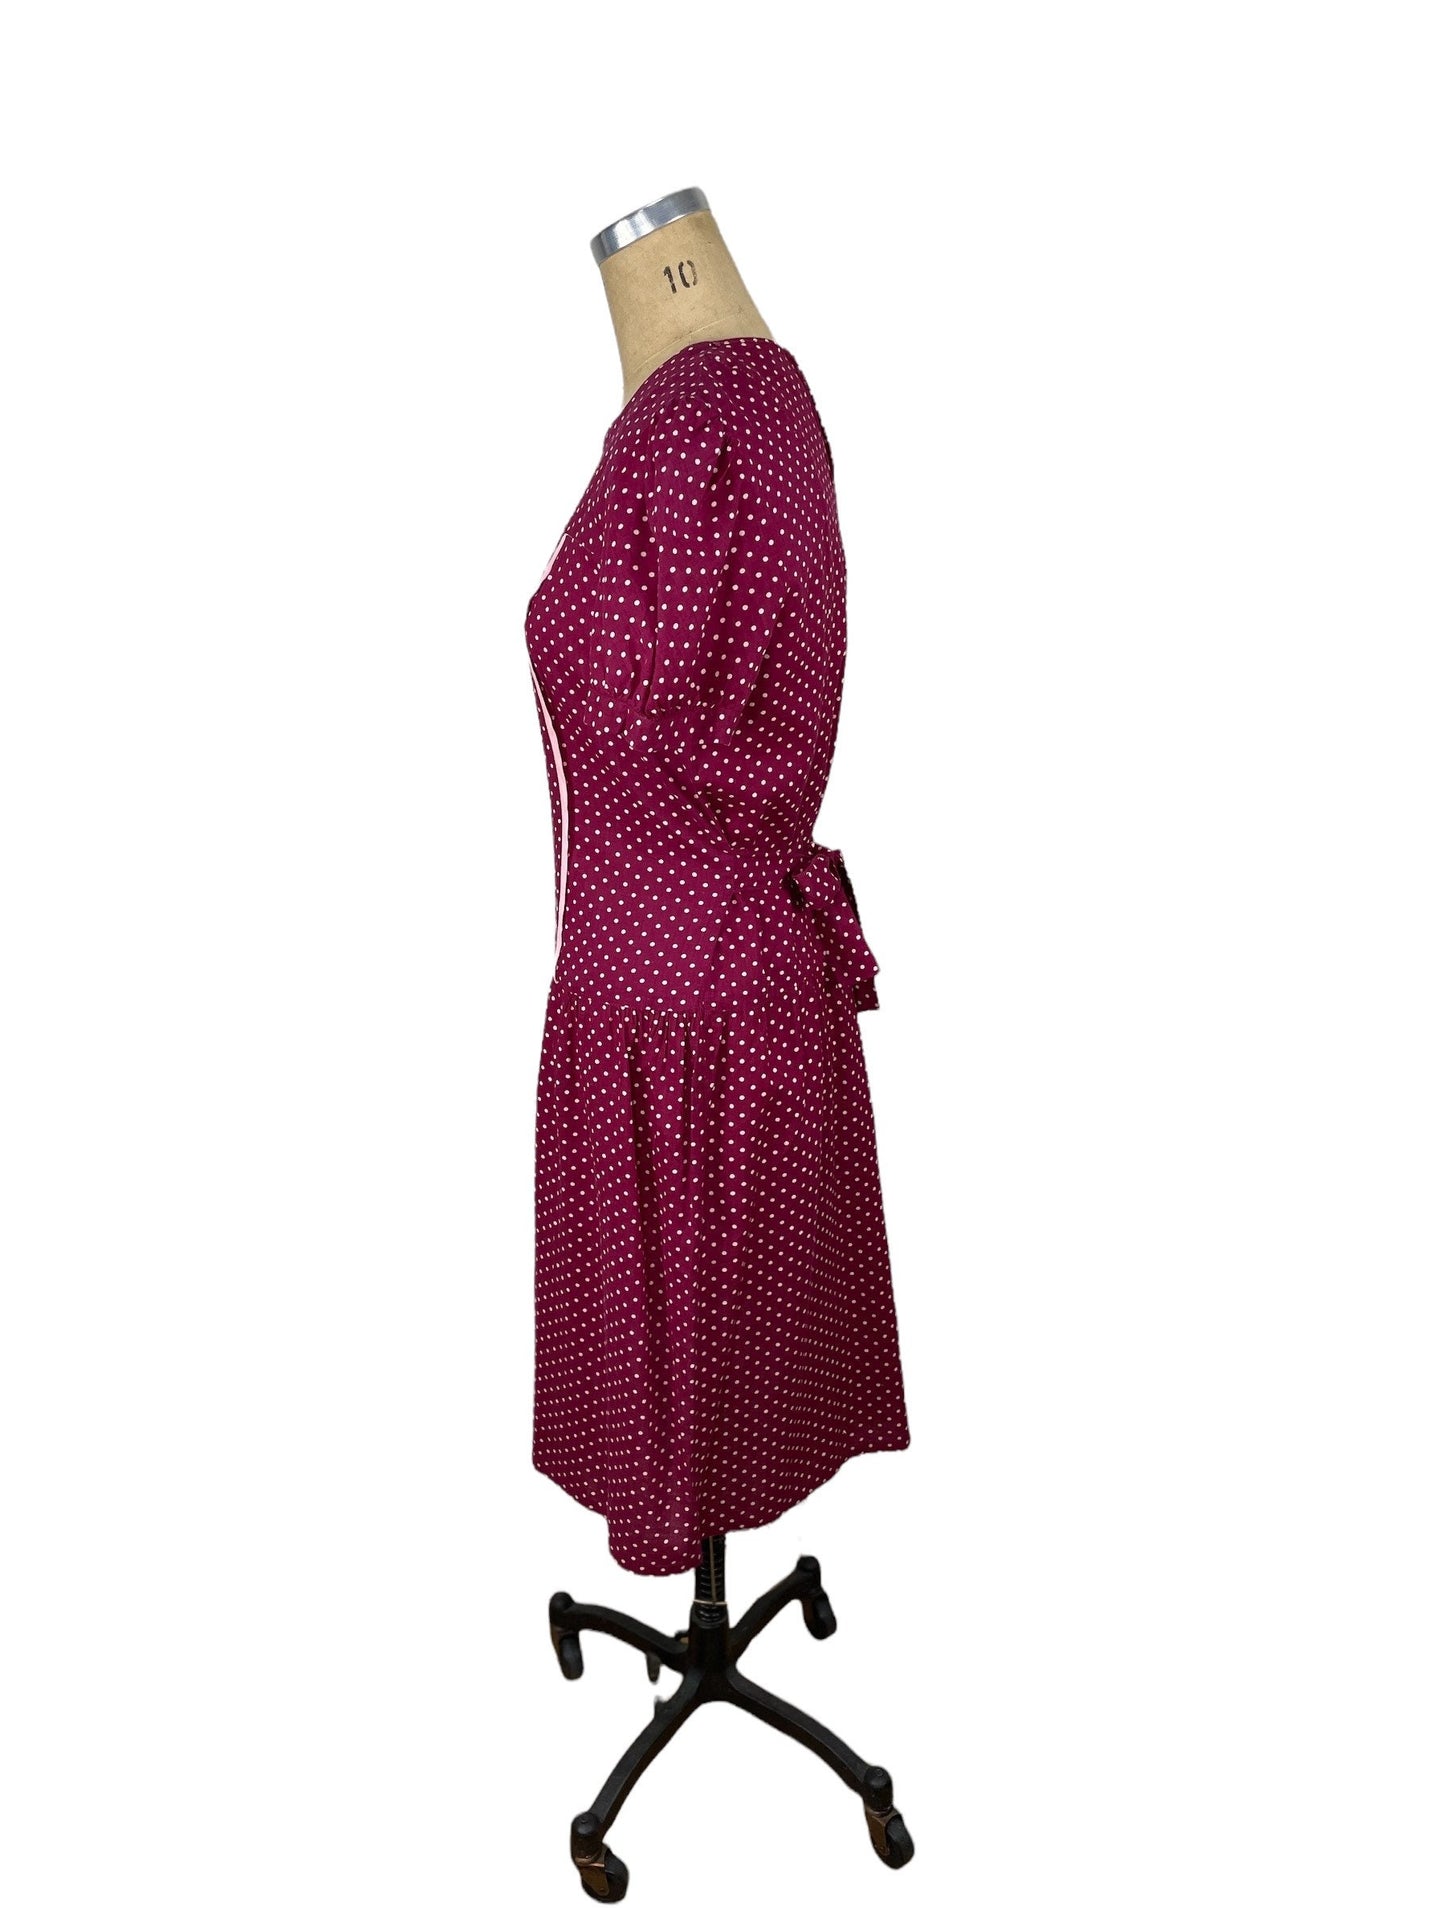 1930s cotton day dress maroon and pink polka dot print Size M